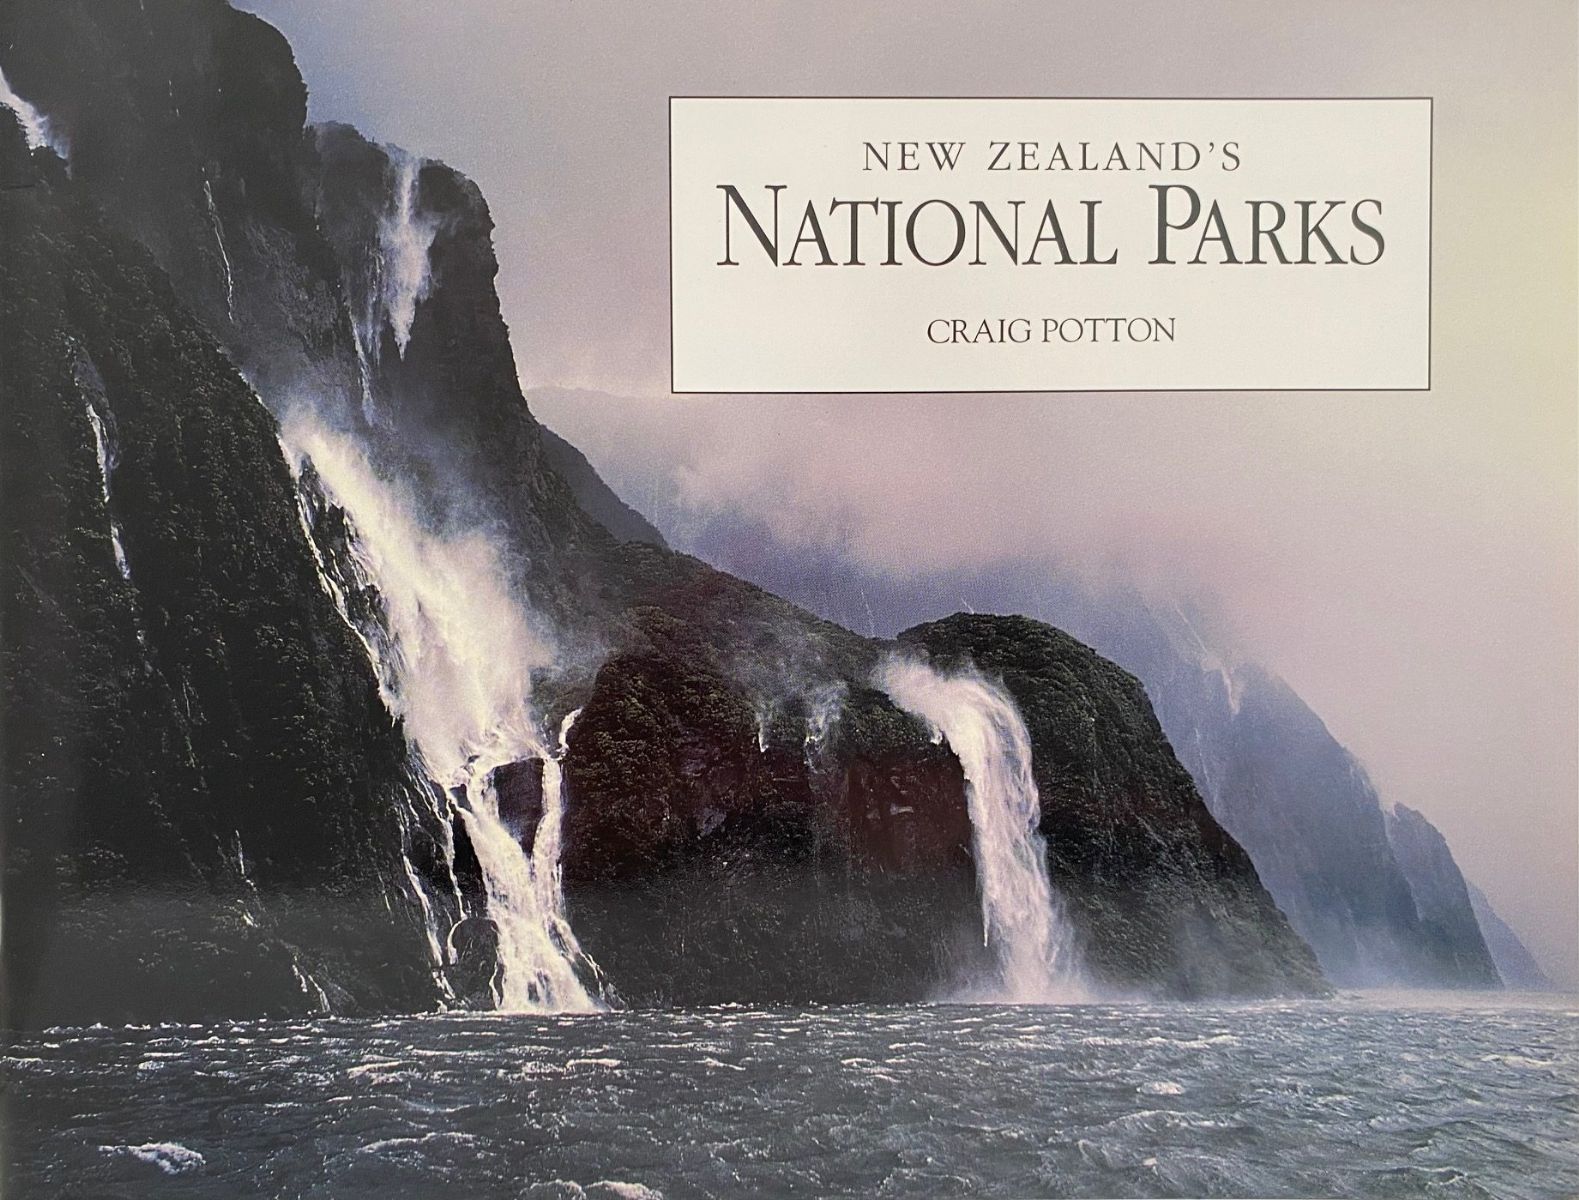 NEW ZEALAND'S NATIONAL PARKS